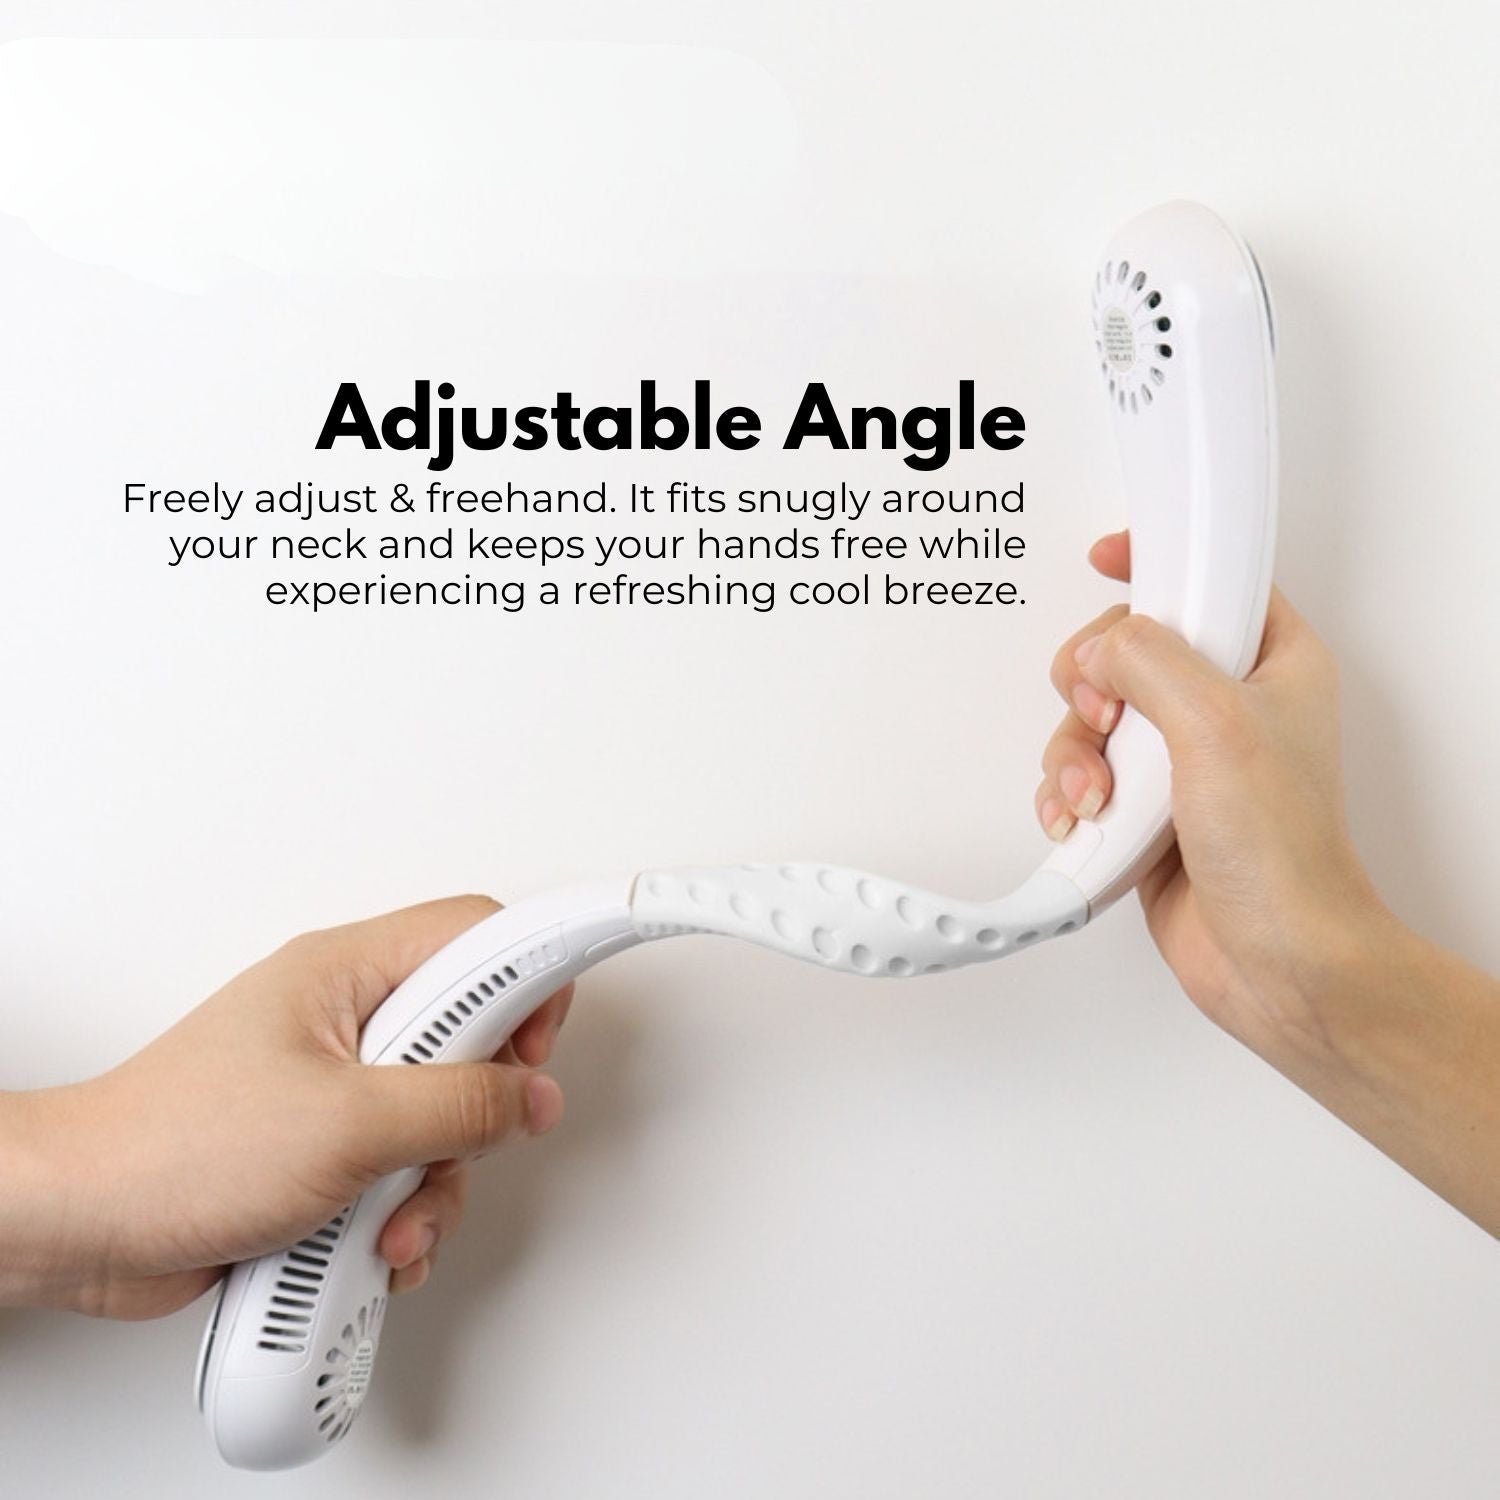 Rechargeable Portable Bladeless Neck Fan with 3 Speeds and 62 Air Outlet (White) GO-NF-100-HJ